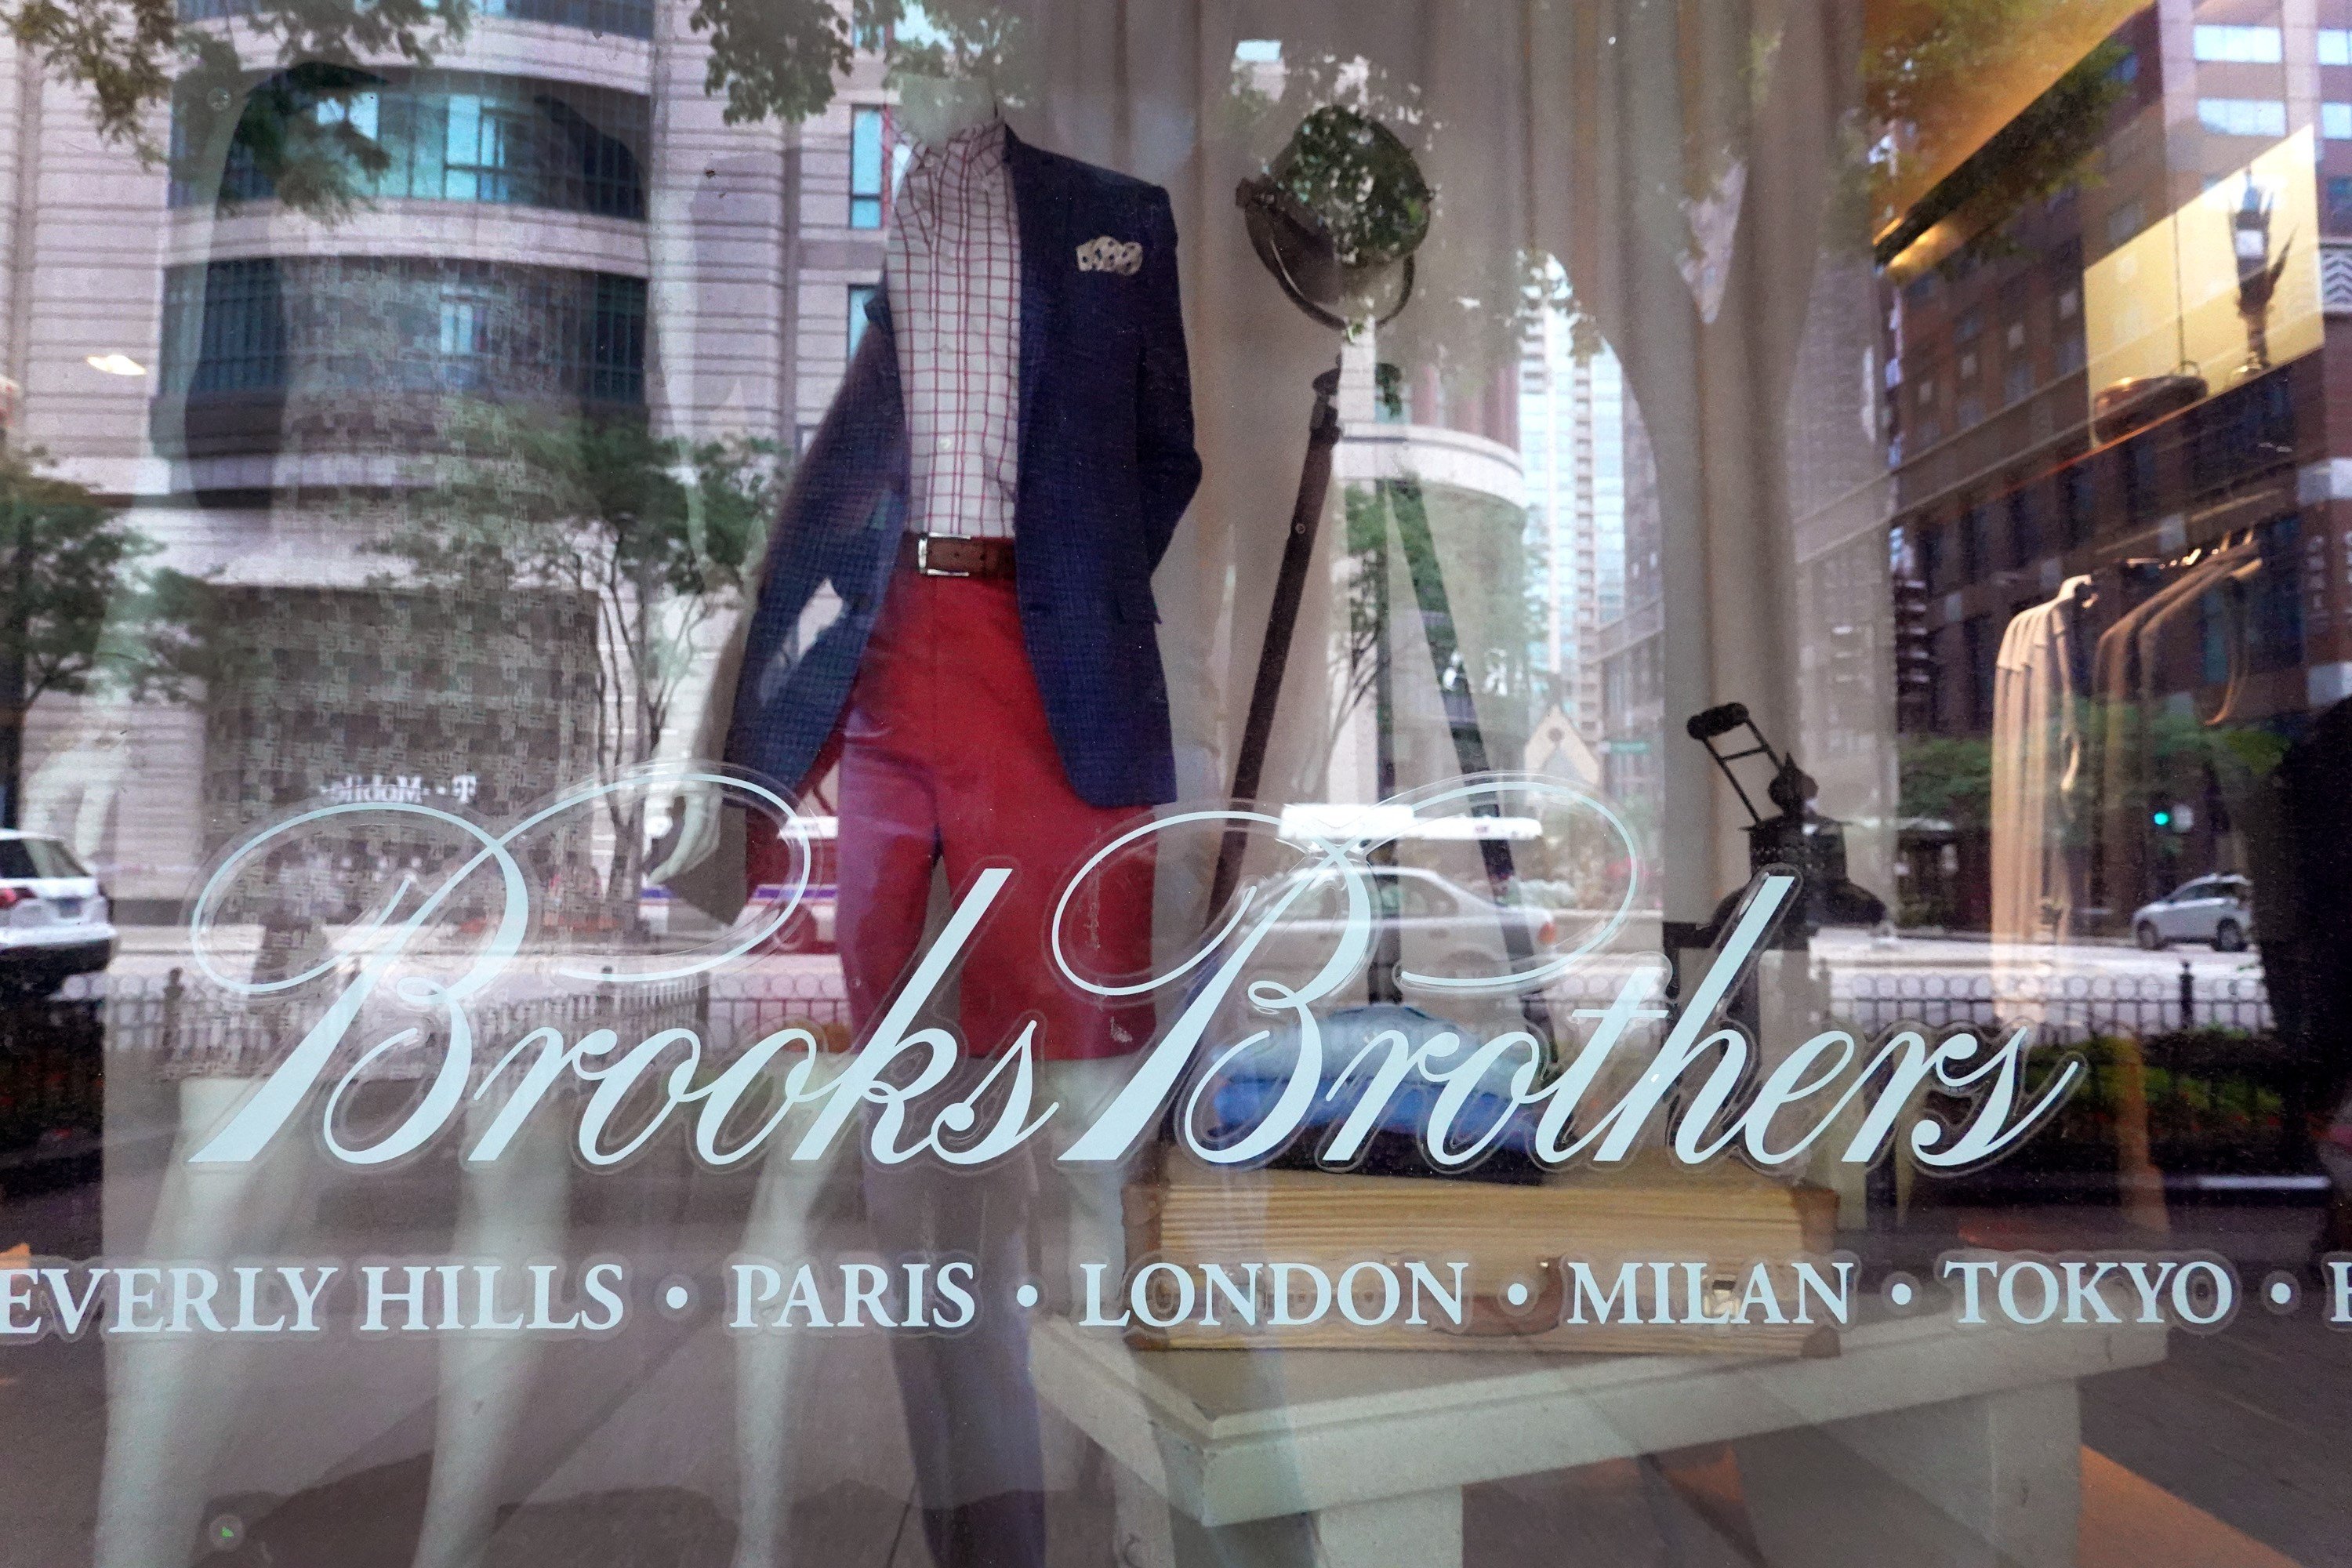 Brooks Brothers, which outfitted 40 of the last 45 presidents